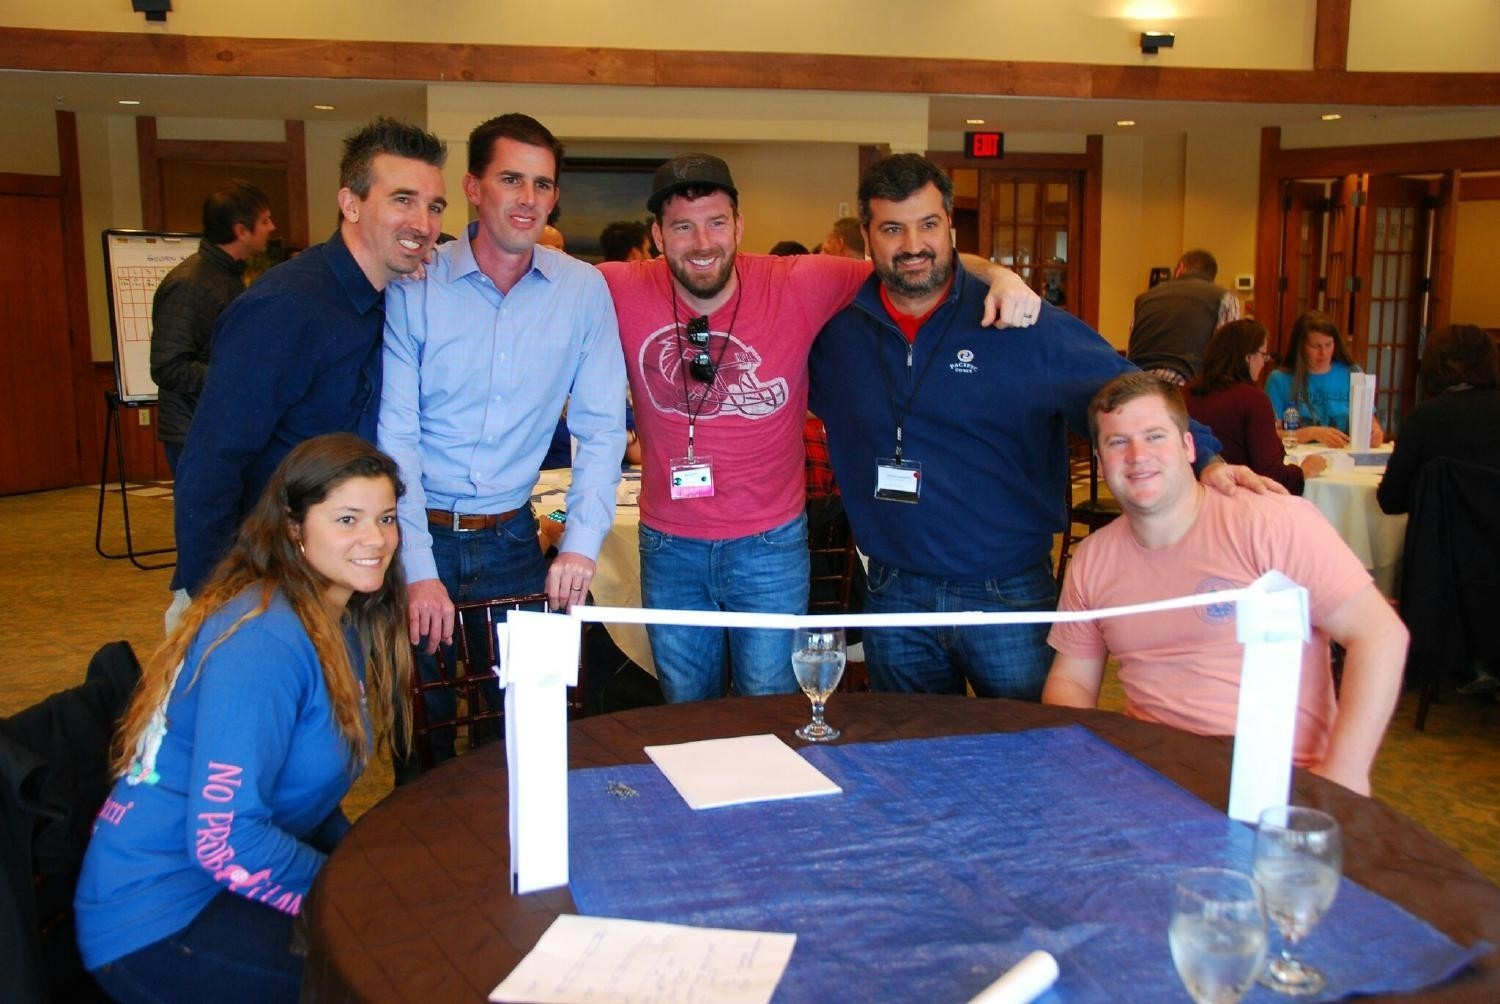 Team building exercises help us find fun and strategic ways to work most effectively with our team members.